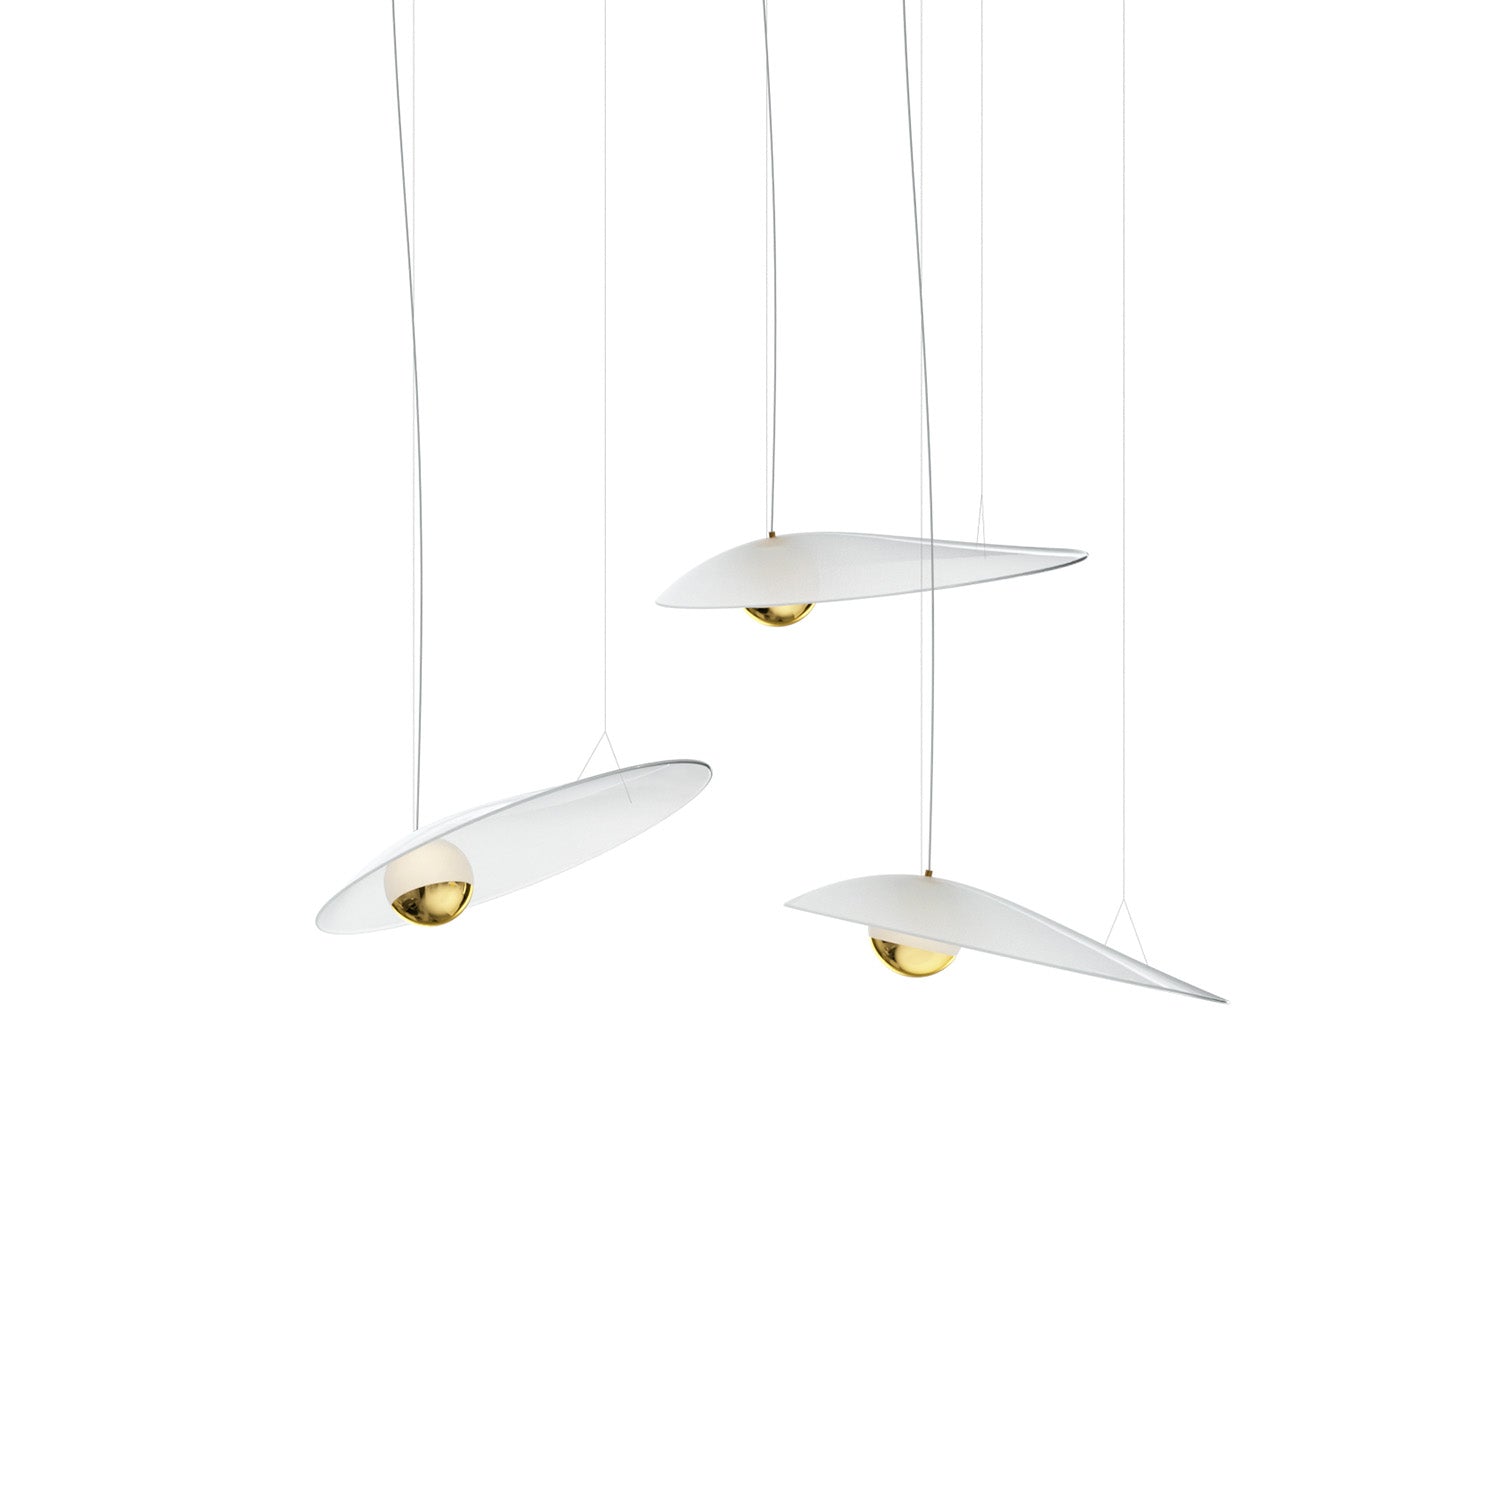 OYSTER - Luxurious pendant lamp, nanocoated glass drop